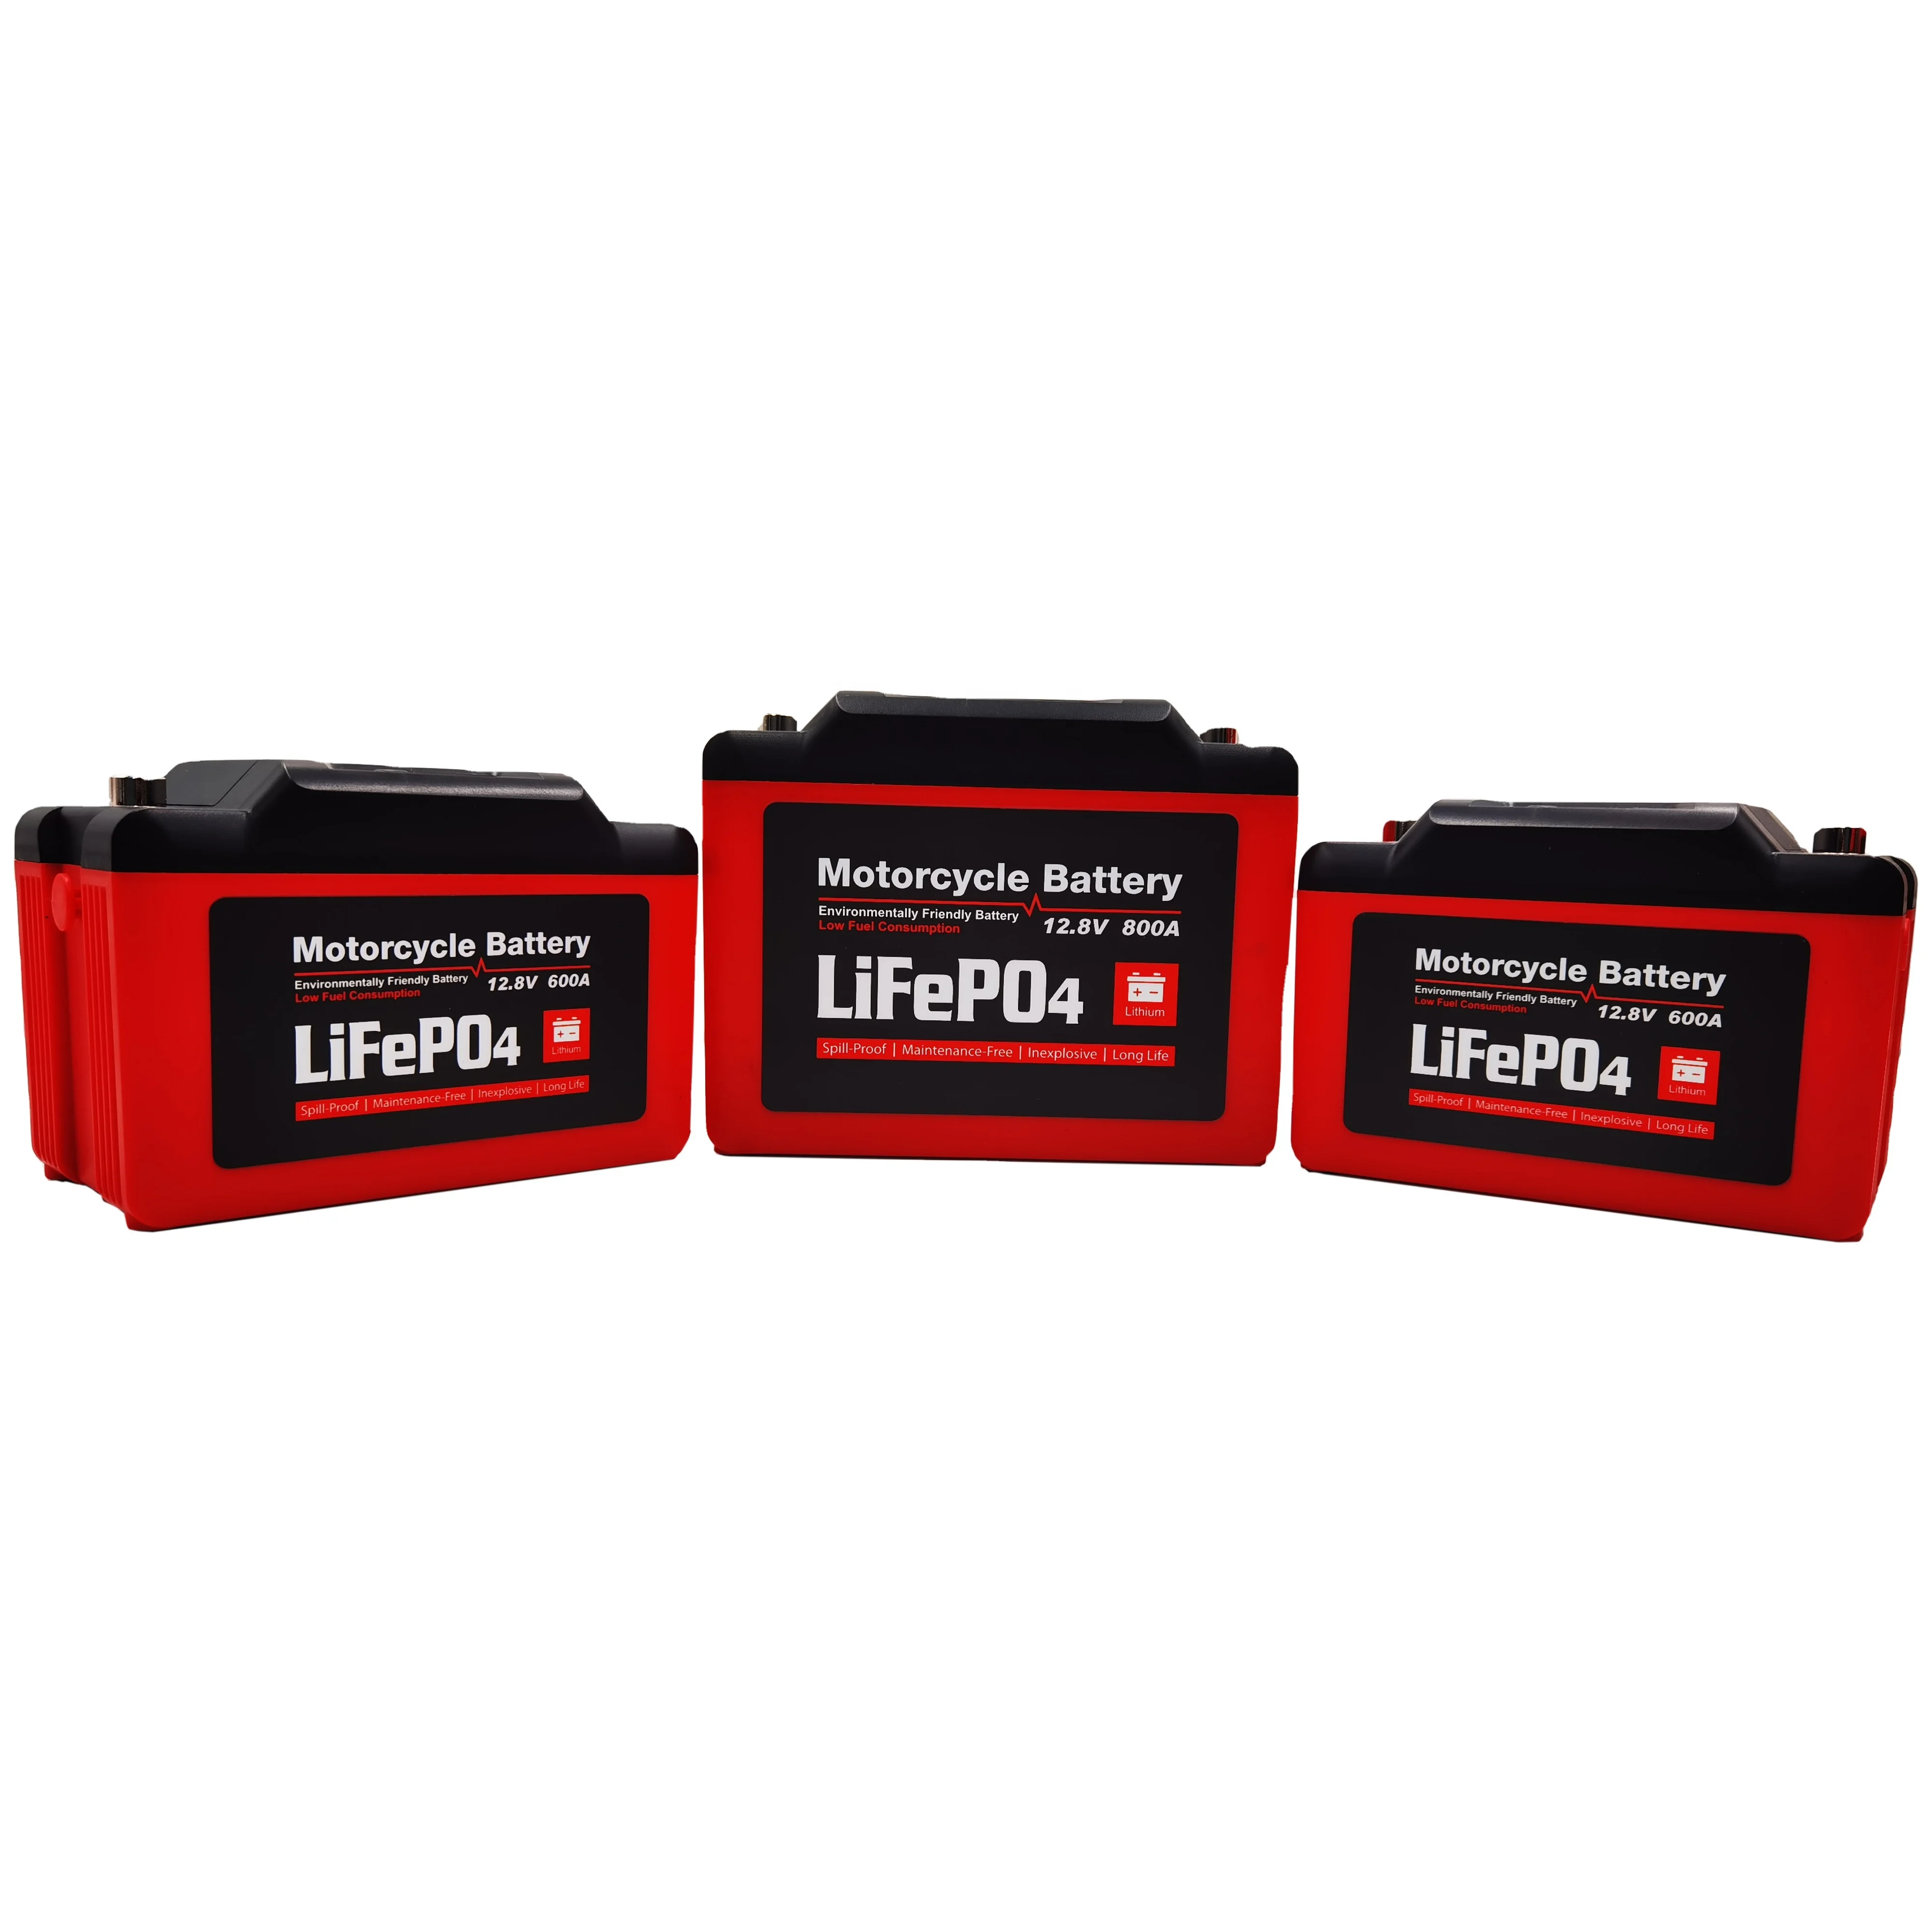 12.8V 2Ah Lithium-ion Motor Cycle Battery Inexplosive and Light weight Apply to Lead Acid Motorcycle Battery 2Ah